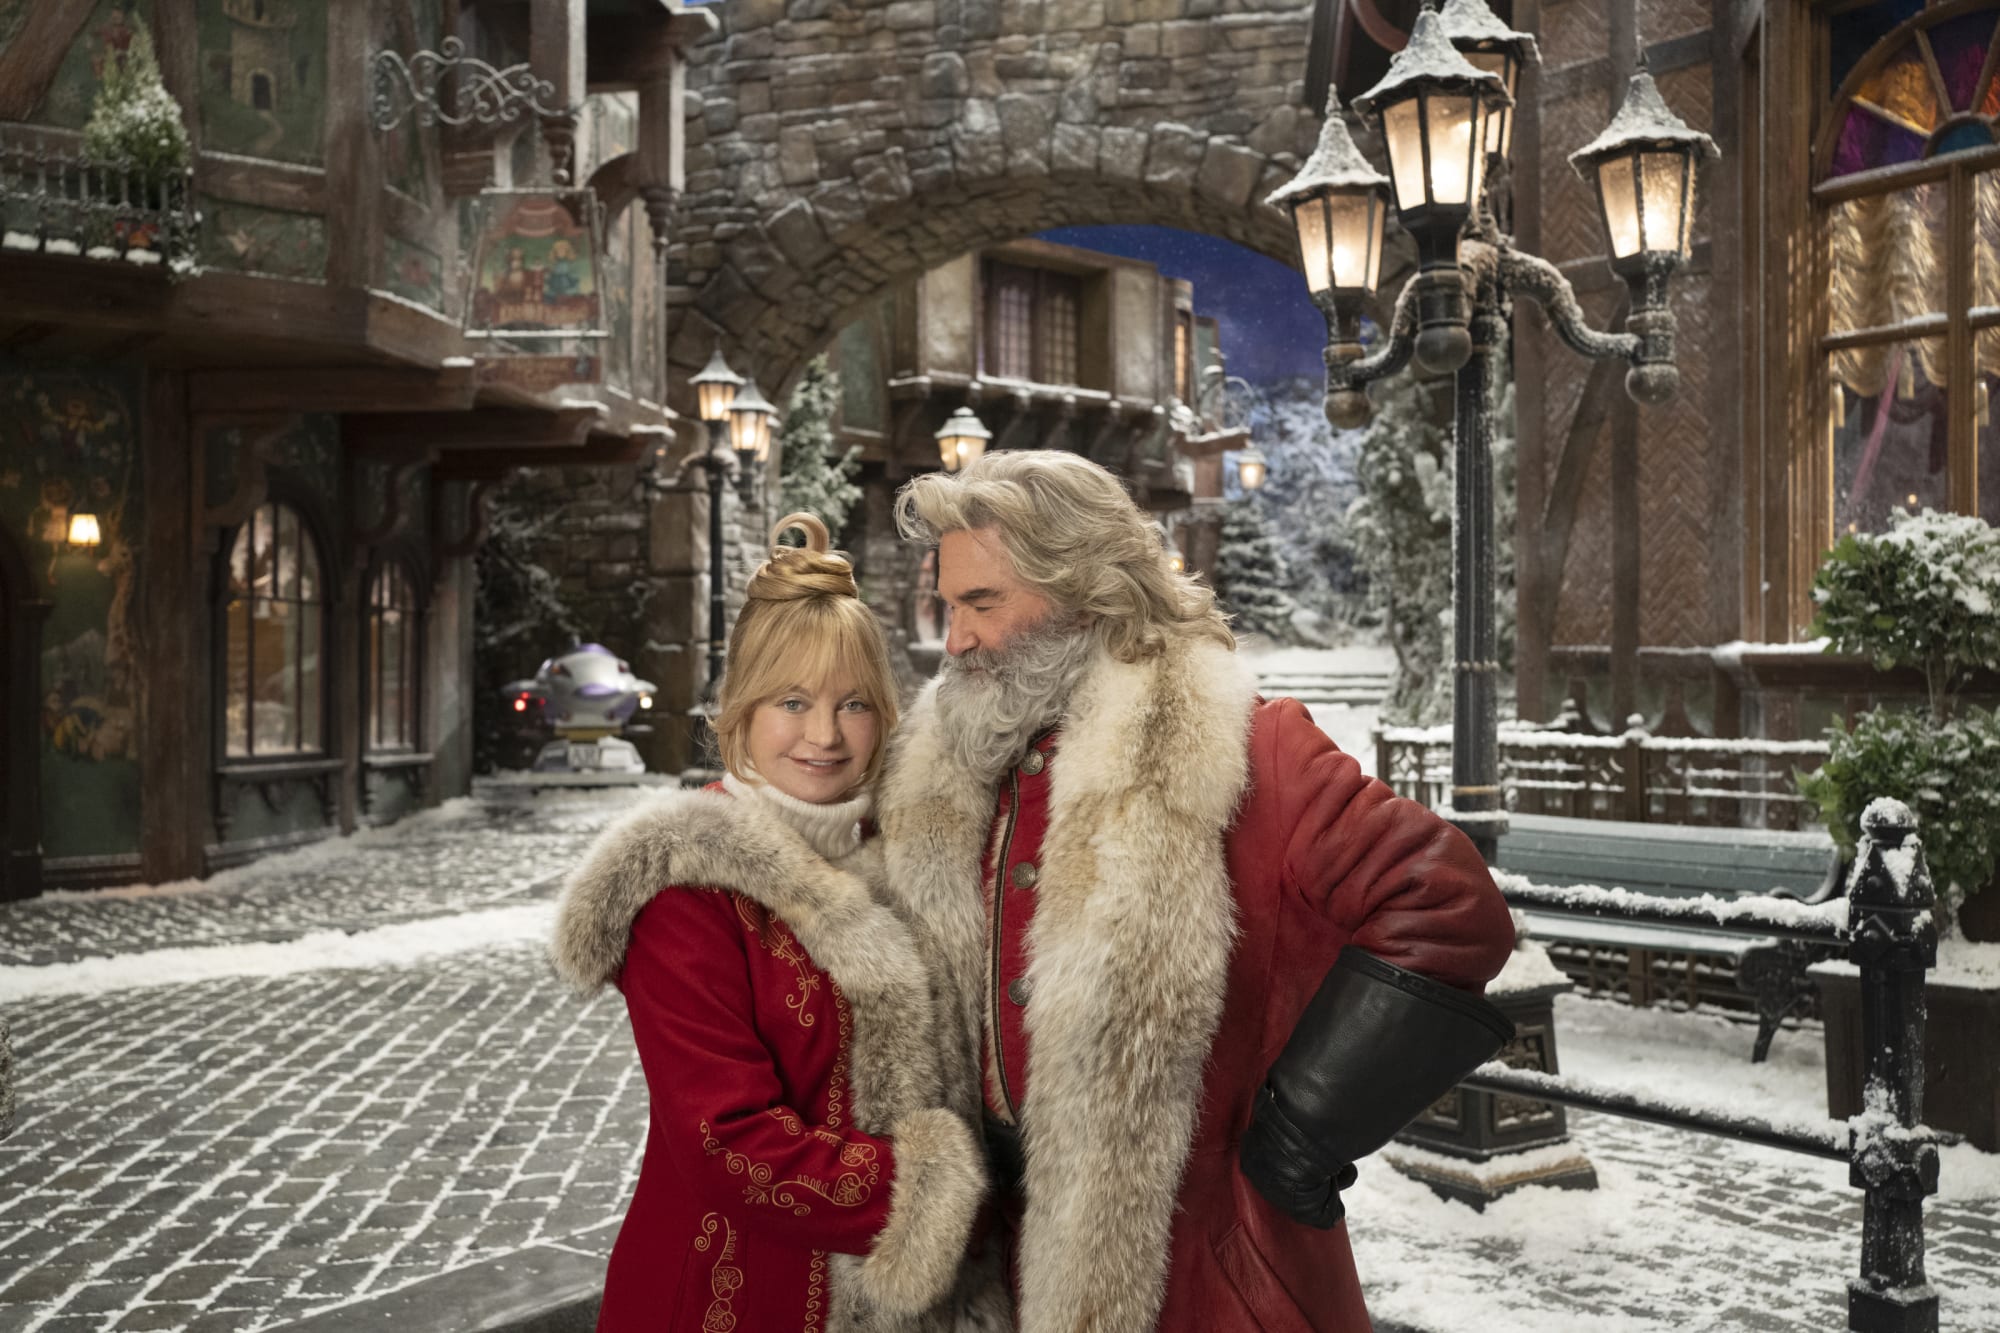 New Christmas movies and shows coming to Netflix in 2020